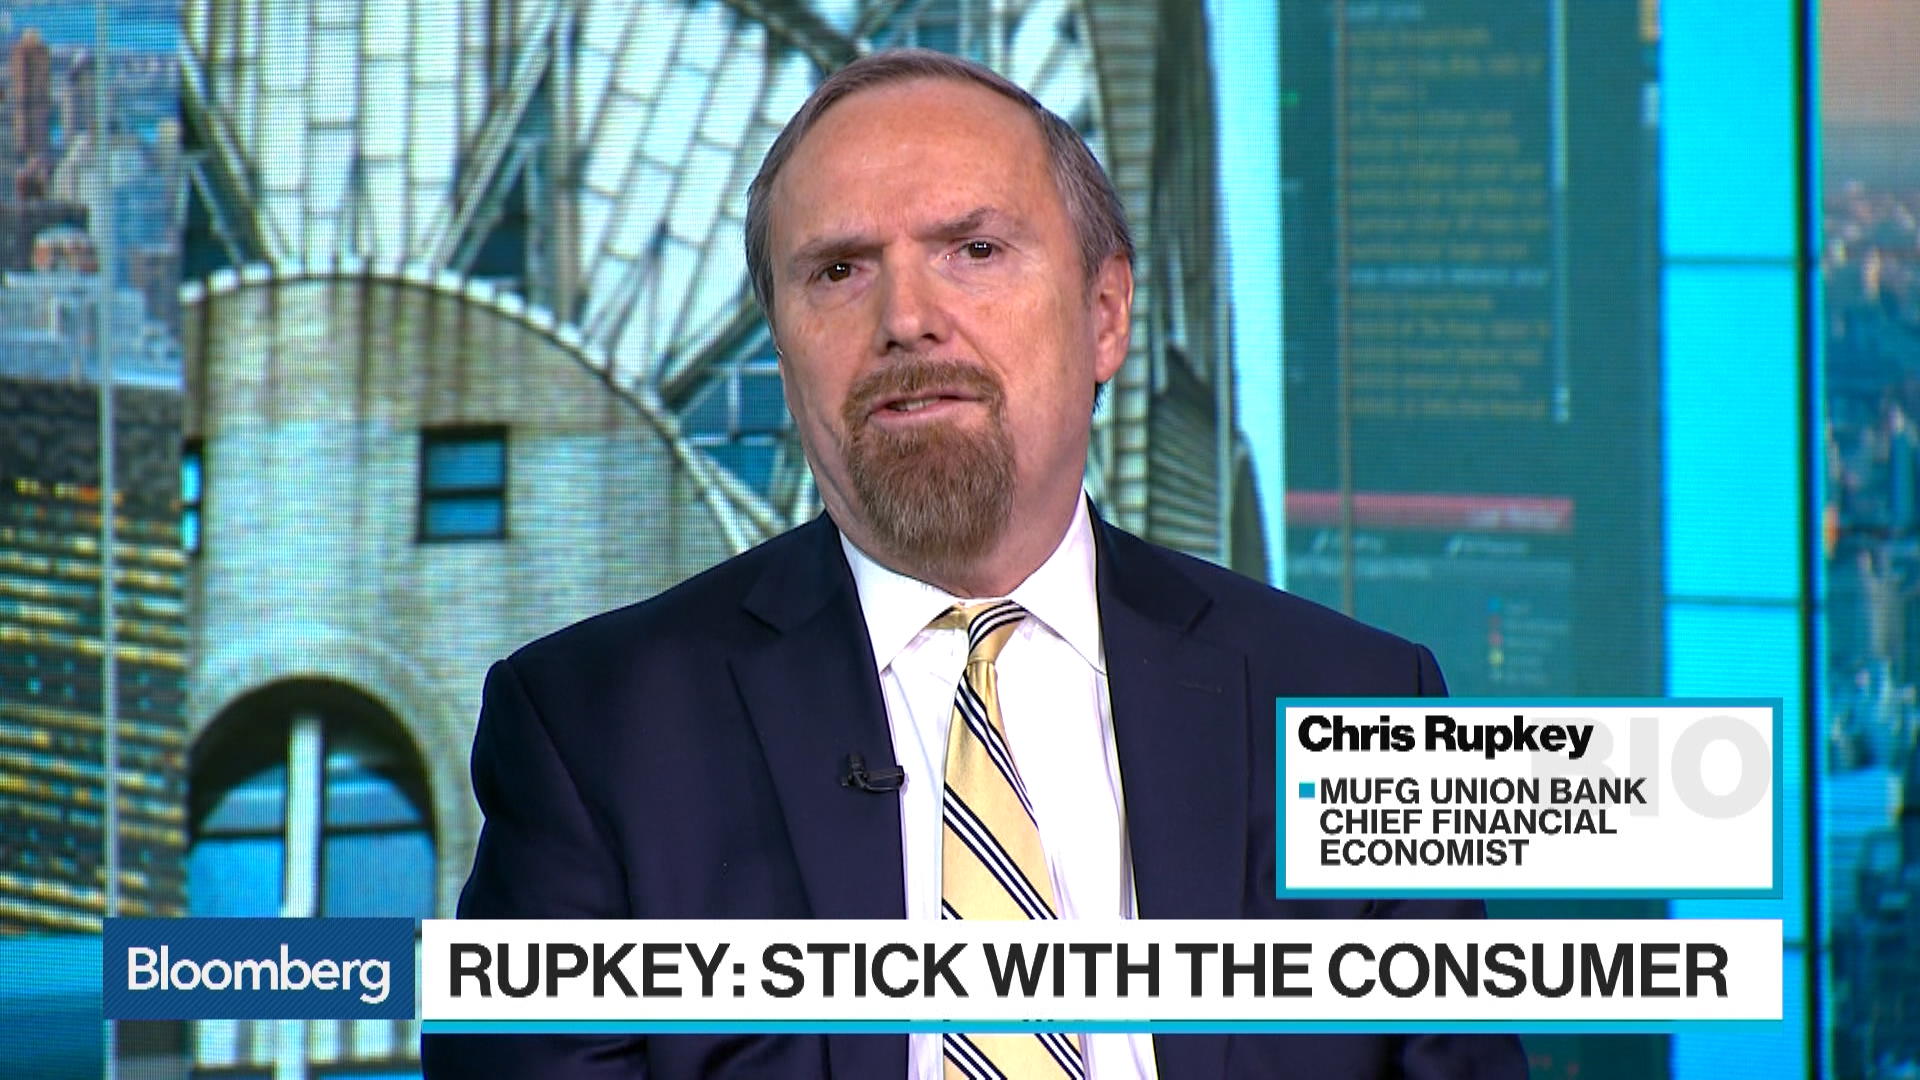 MUFG Union Bank's Rupkey Says Stick With the Consumer - Bloomberg